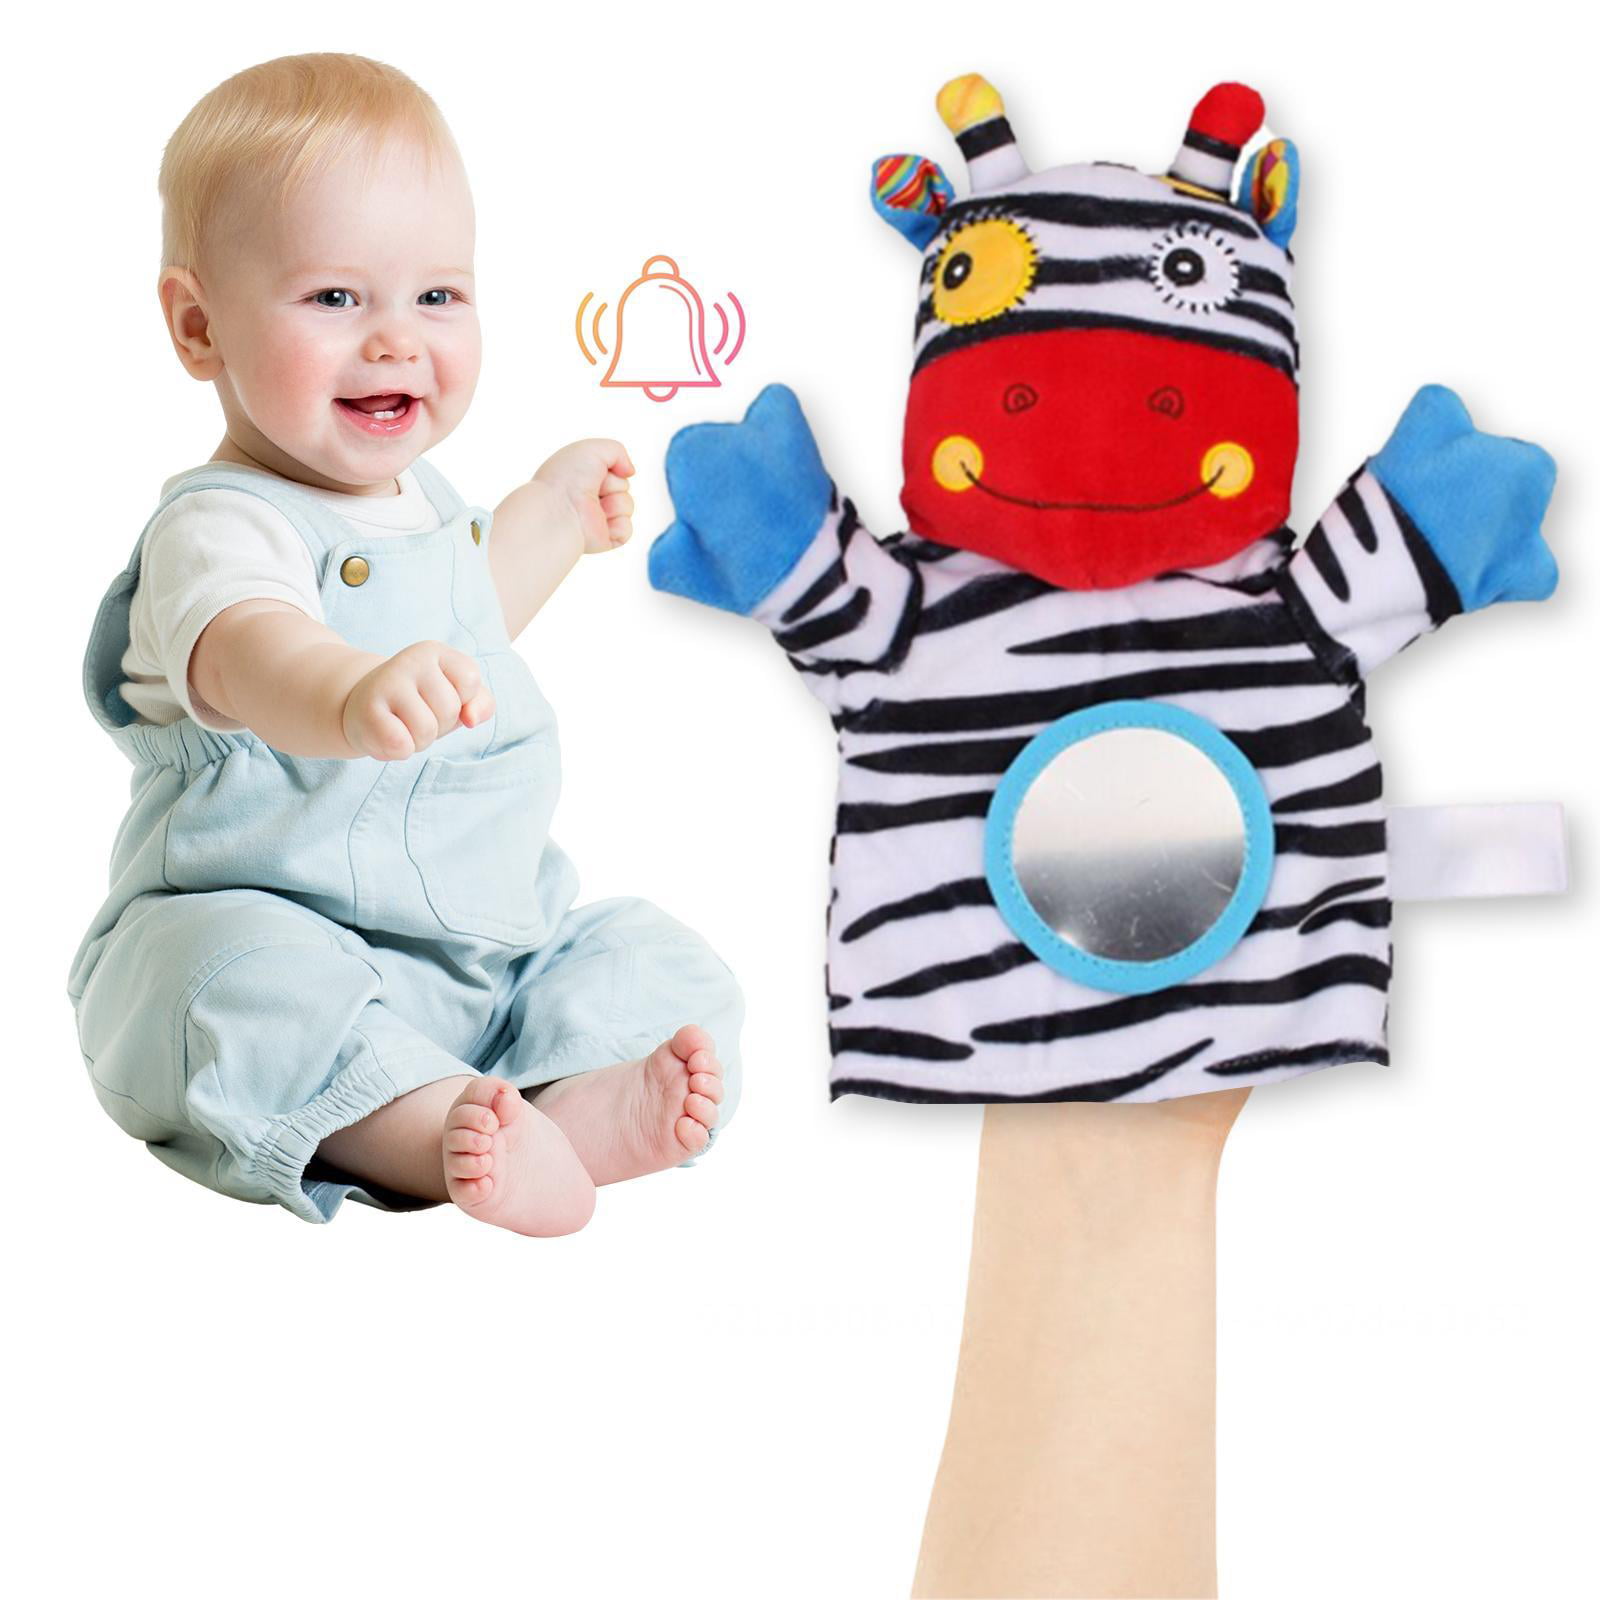 Teaching Baby Animal Hand Puppets Preschool & Role-Play Elephant Soft Plush Stuffed Animal Puppet Toy for Storytelling Soothing Security Blanket with Silicone Teething Toy 